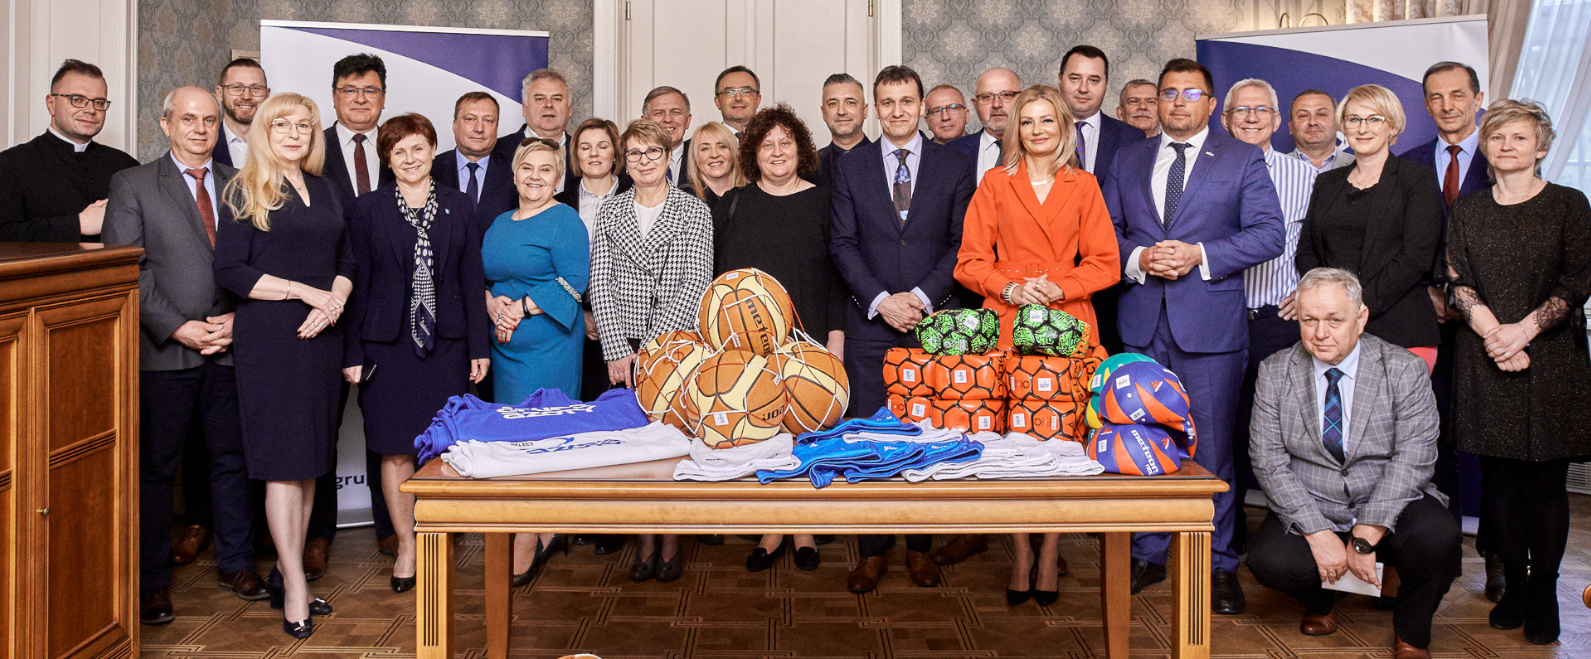 Grupa Azoty S.A. has donated sports equipment to further primary schools, with support provided to almost 40 educational establishments to date